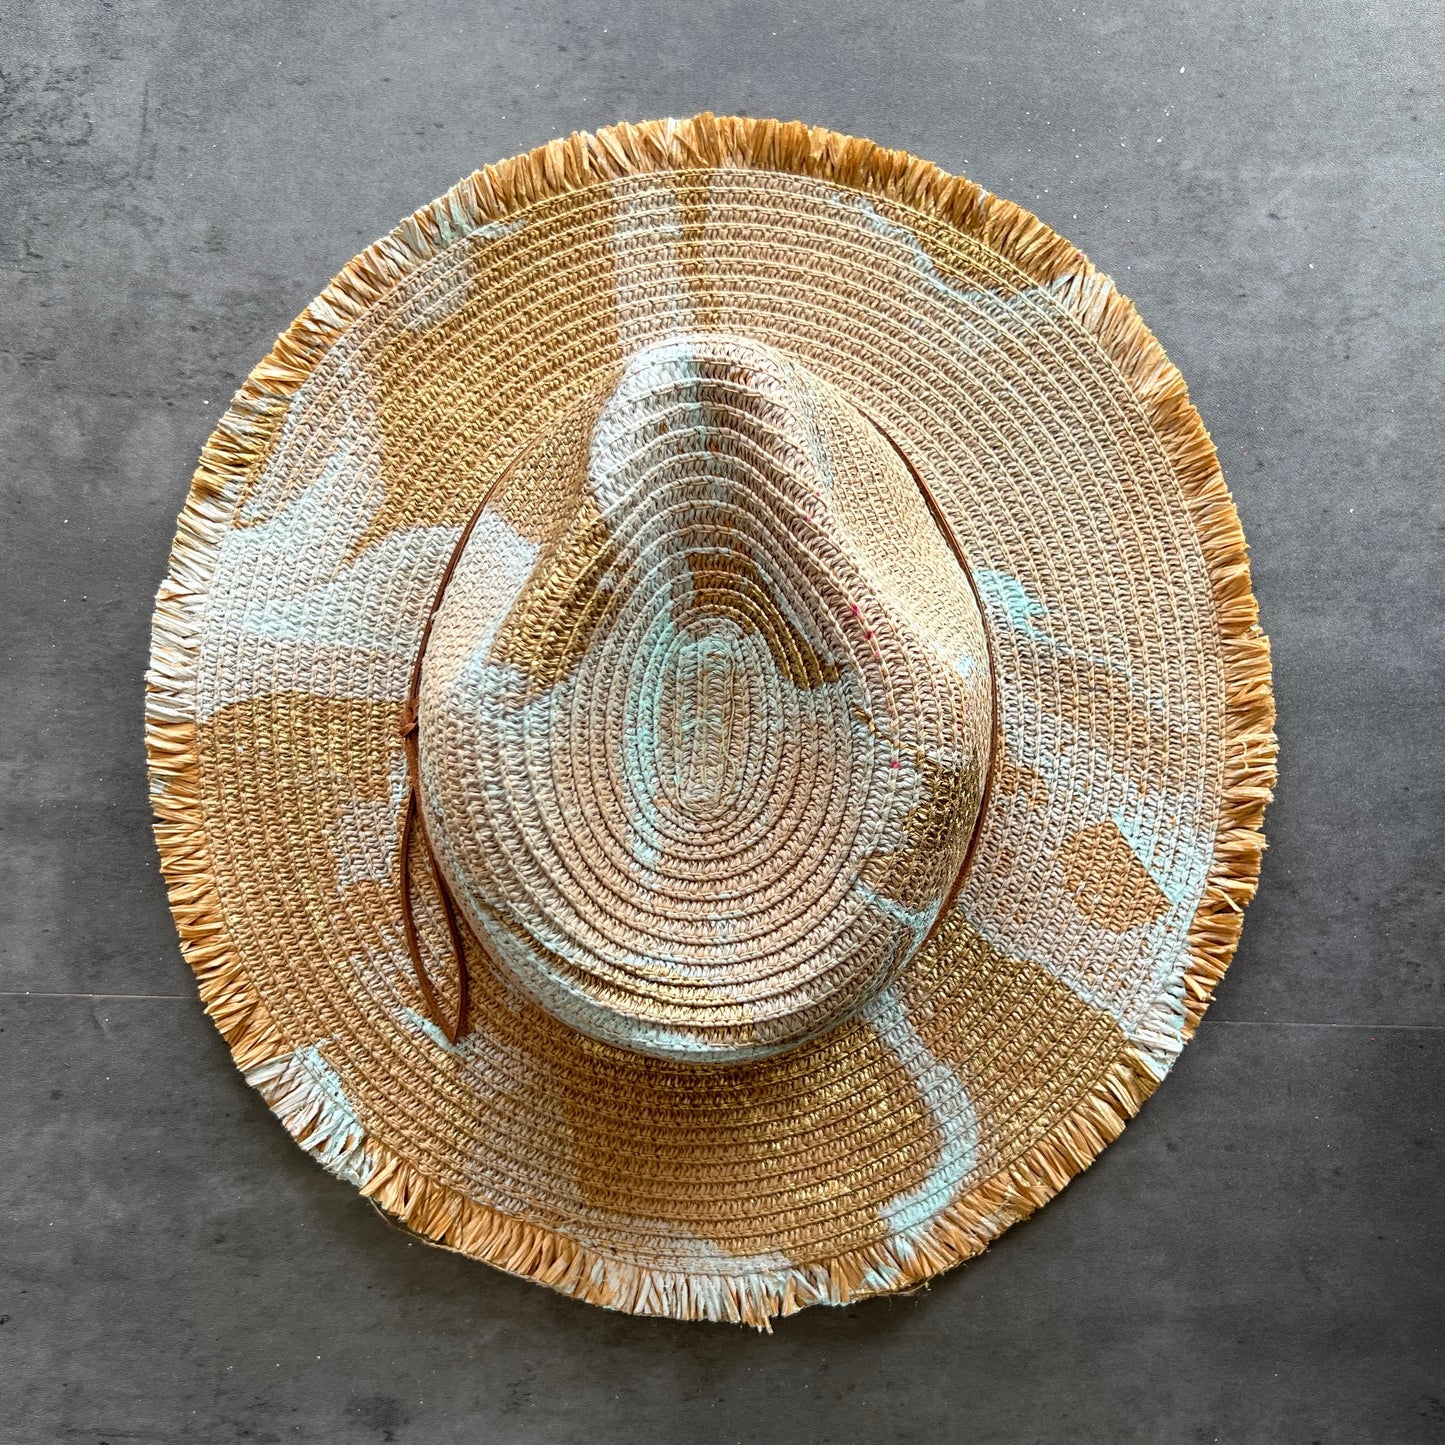 top view of tan khaki straw brim rancher hat with fringe has seafoam mint and gold paint marbling  and brown leather faux suede cord. sun hat.